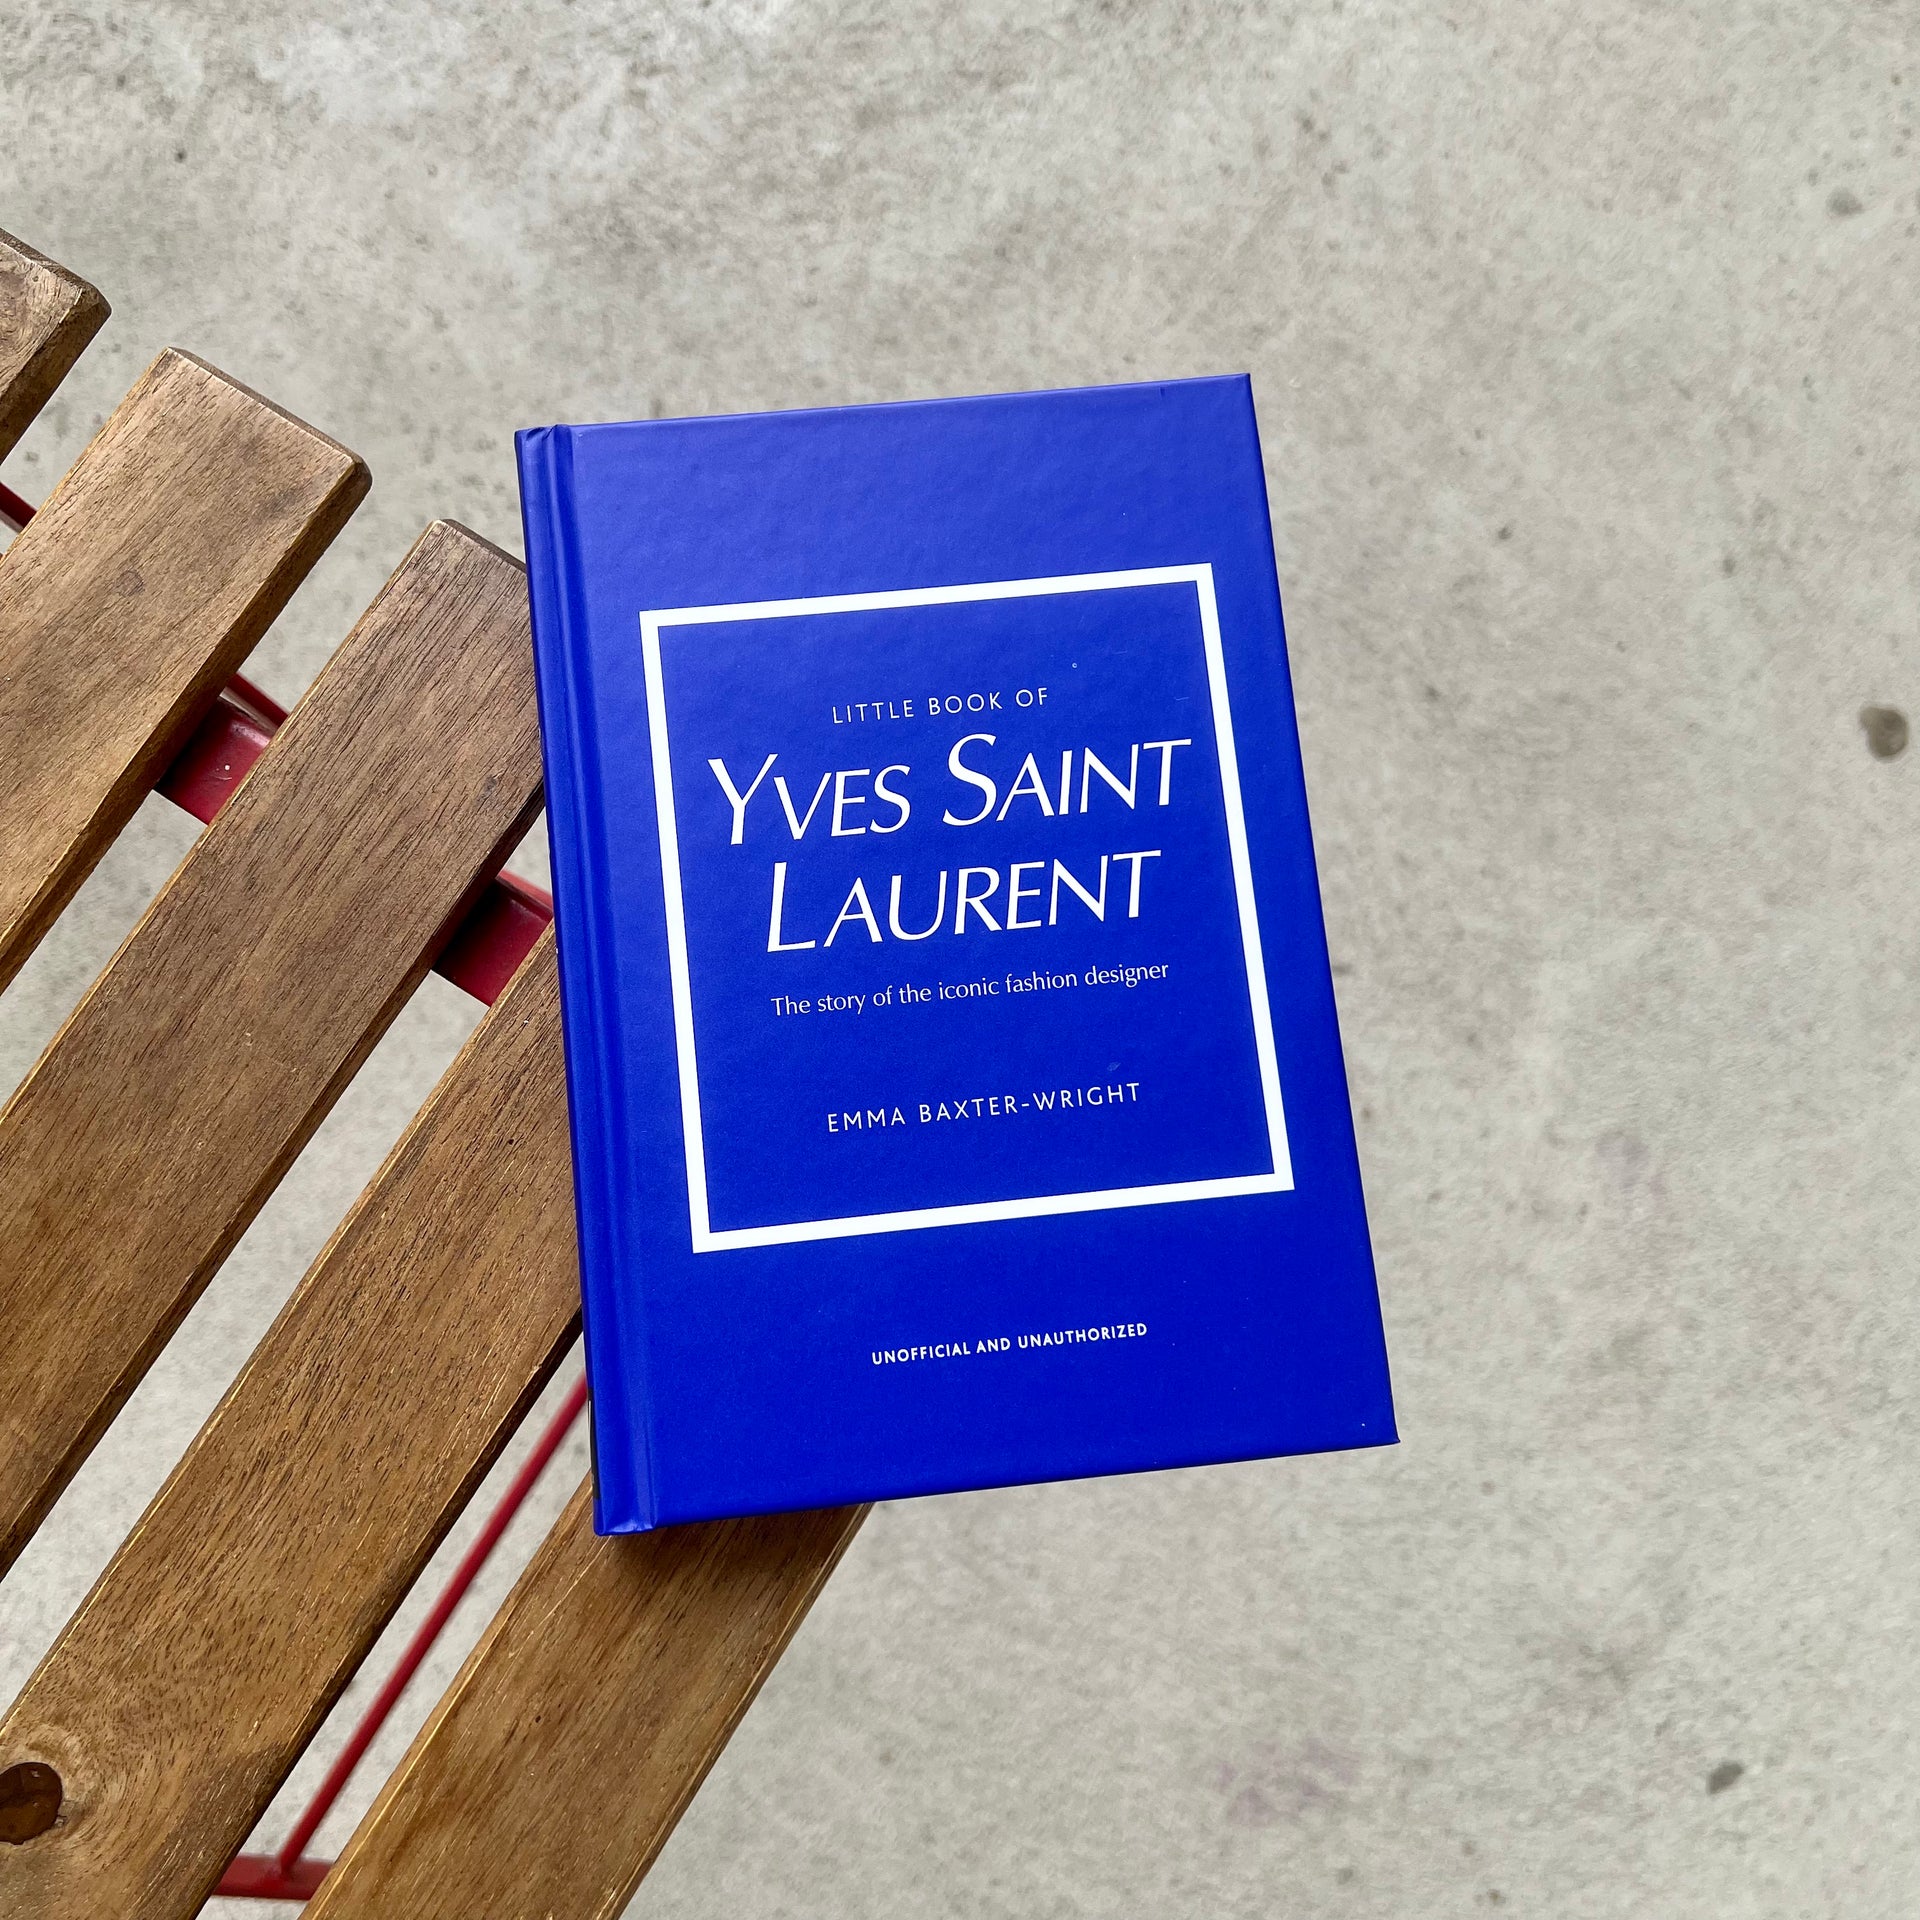 Little Book of Yves Saint Laurent: The Story of the Iconic Fashion House [Book]